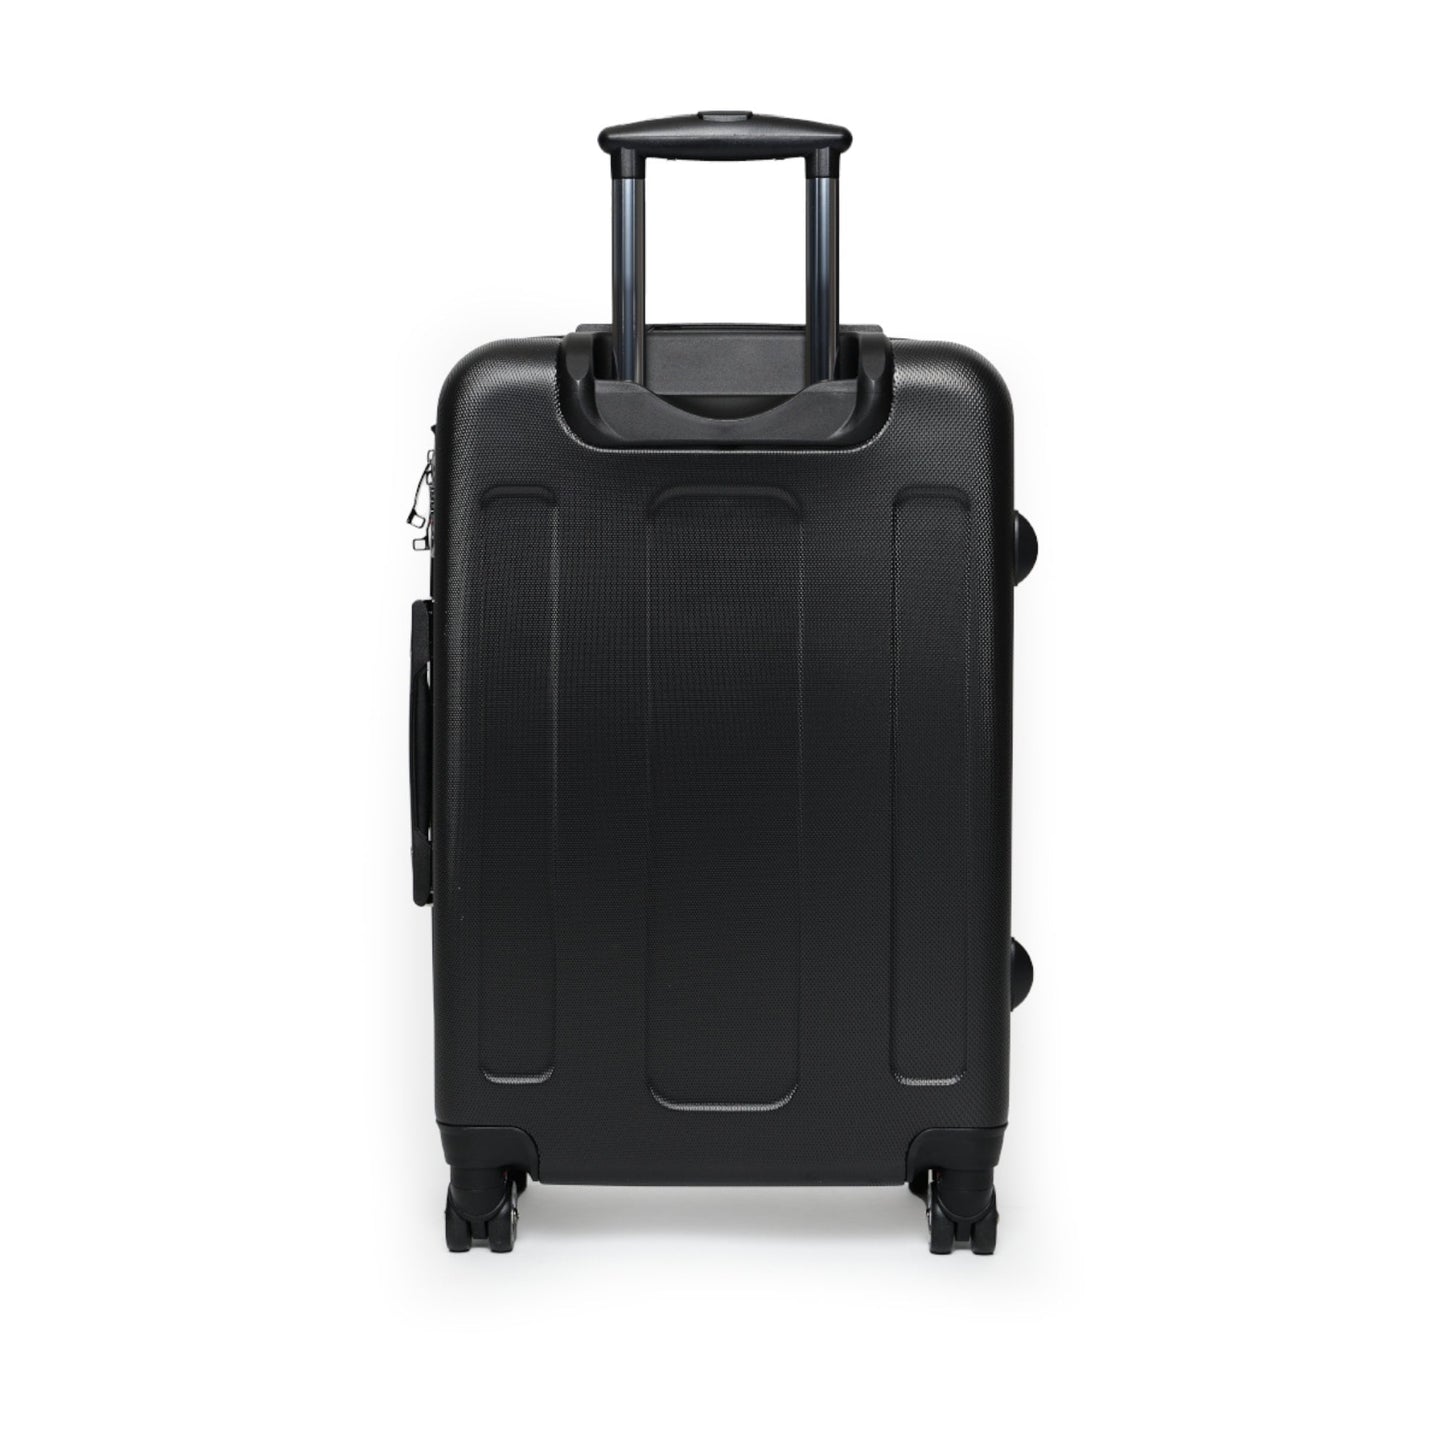 Gifts for men - Suitcase - suitcases - large suitcase - carry on suitcase - luggage - airport - suitcase with wheels - Carry on luggage